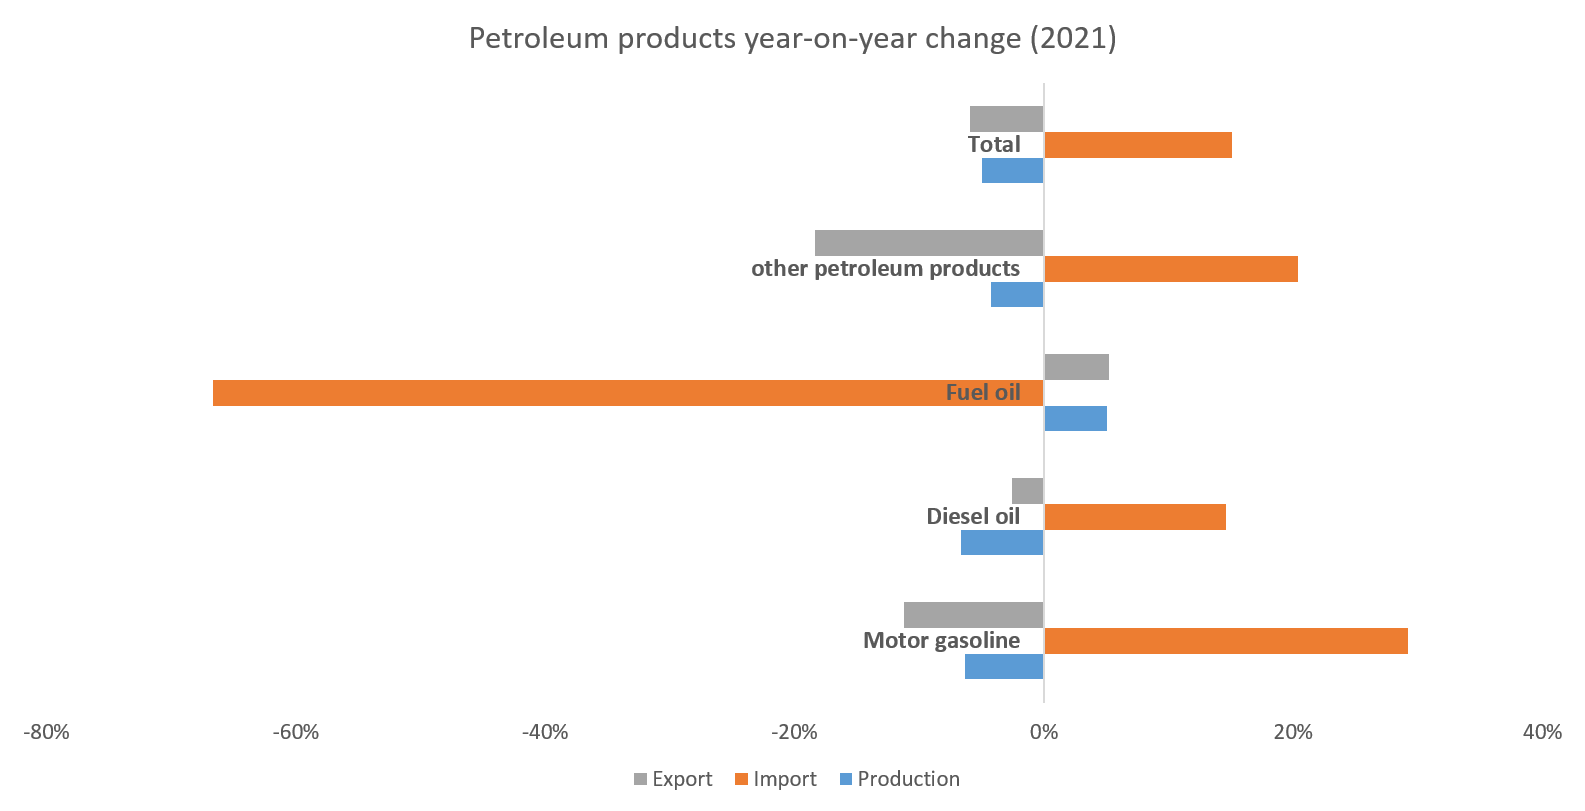 Petroleum_products_year-on-year_change_2021.png